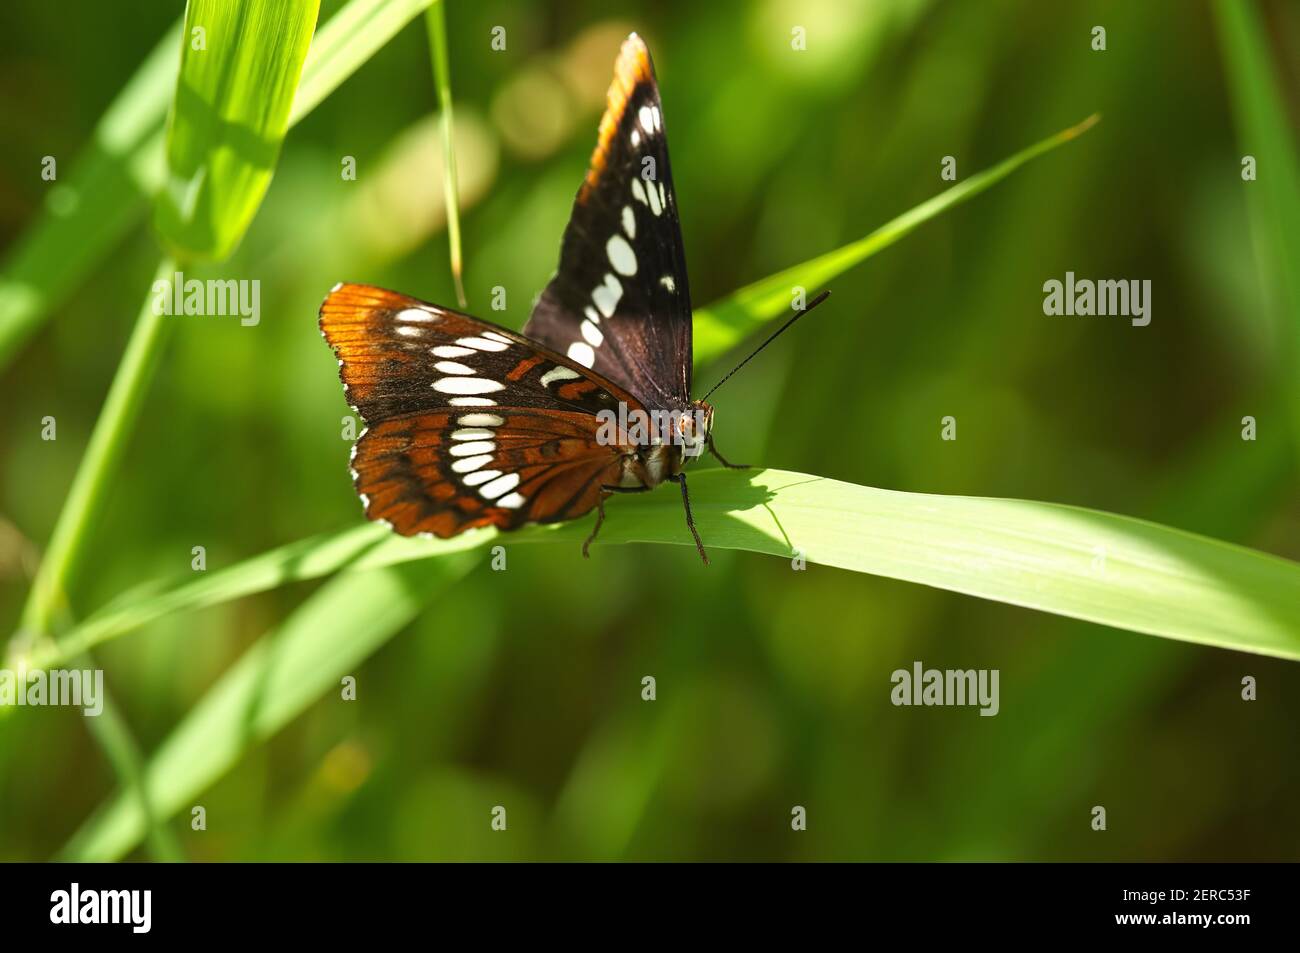 A Lorquin`s Admiral butterfly (Limenitis lorquini) perched on a blade of grass. Stock Photo